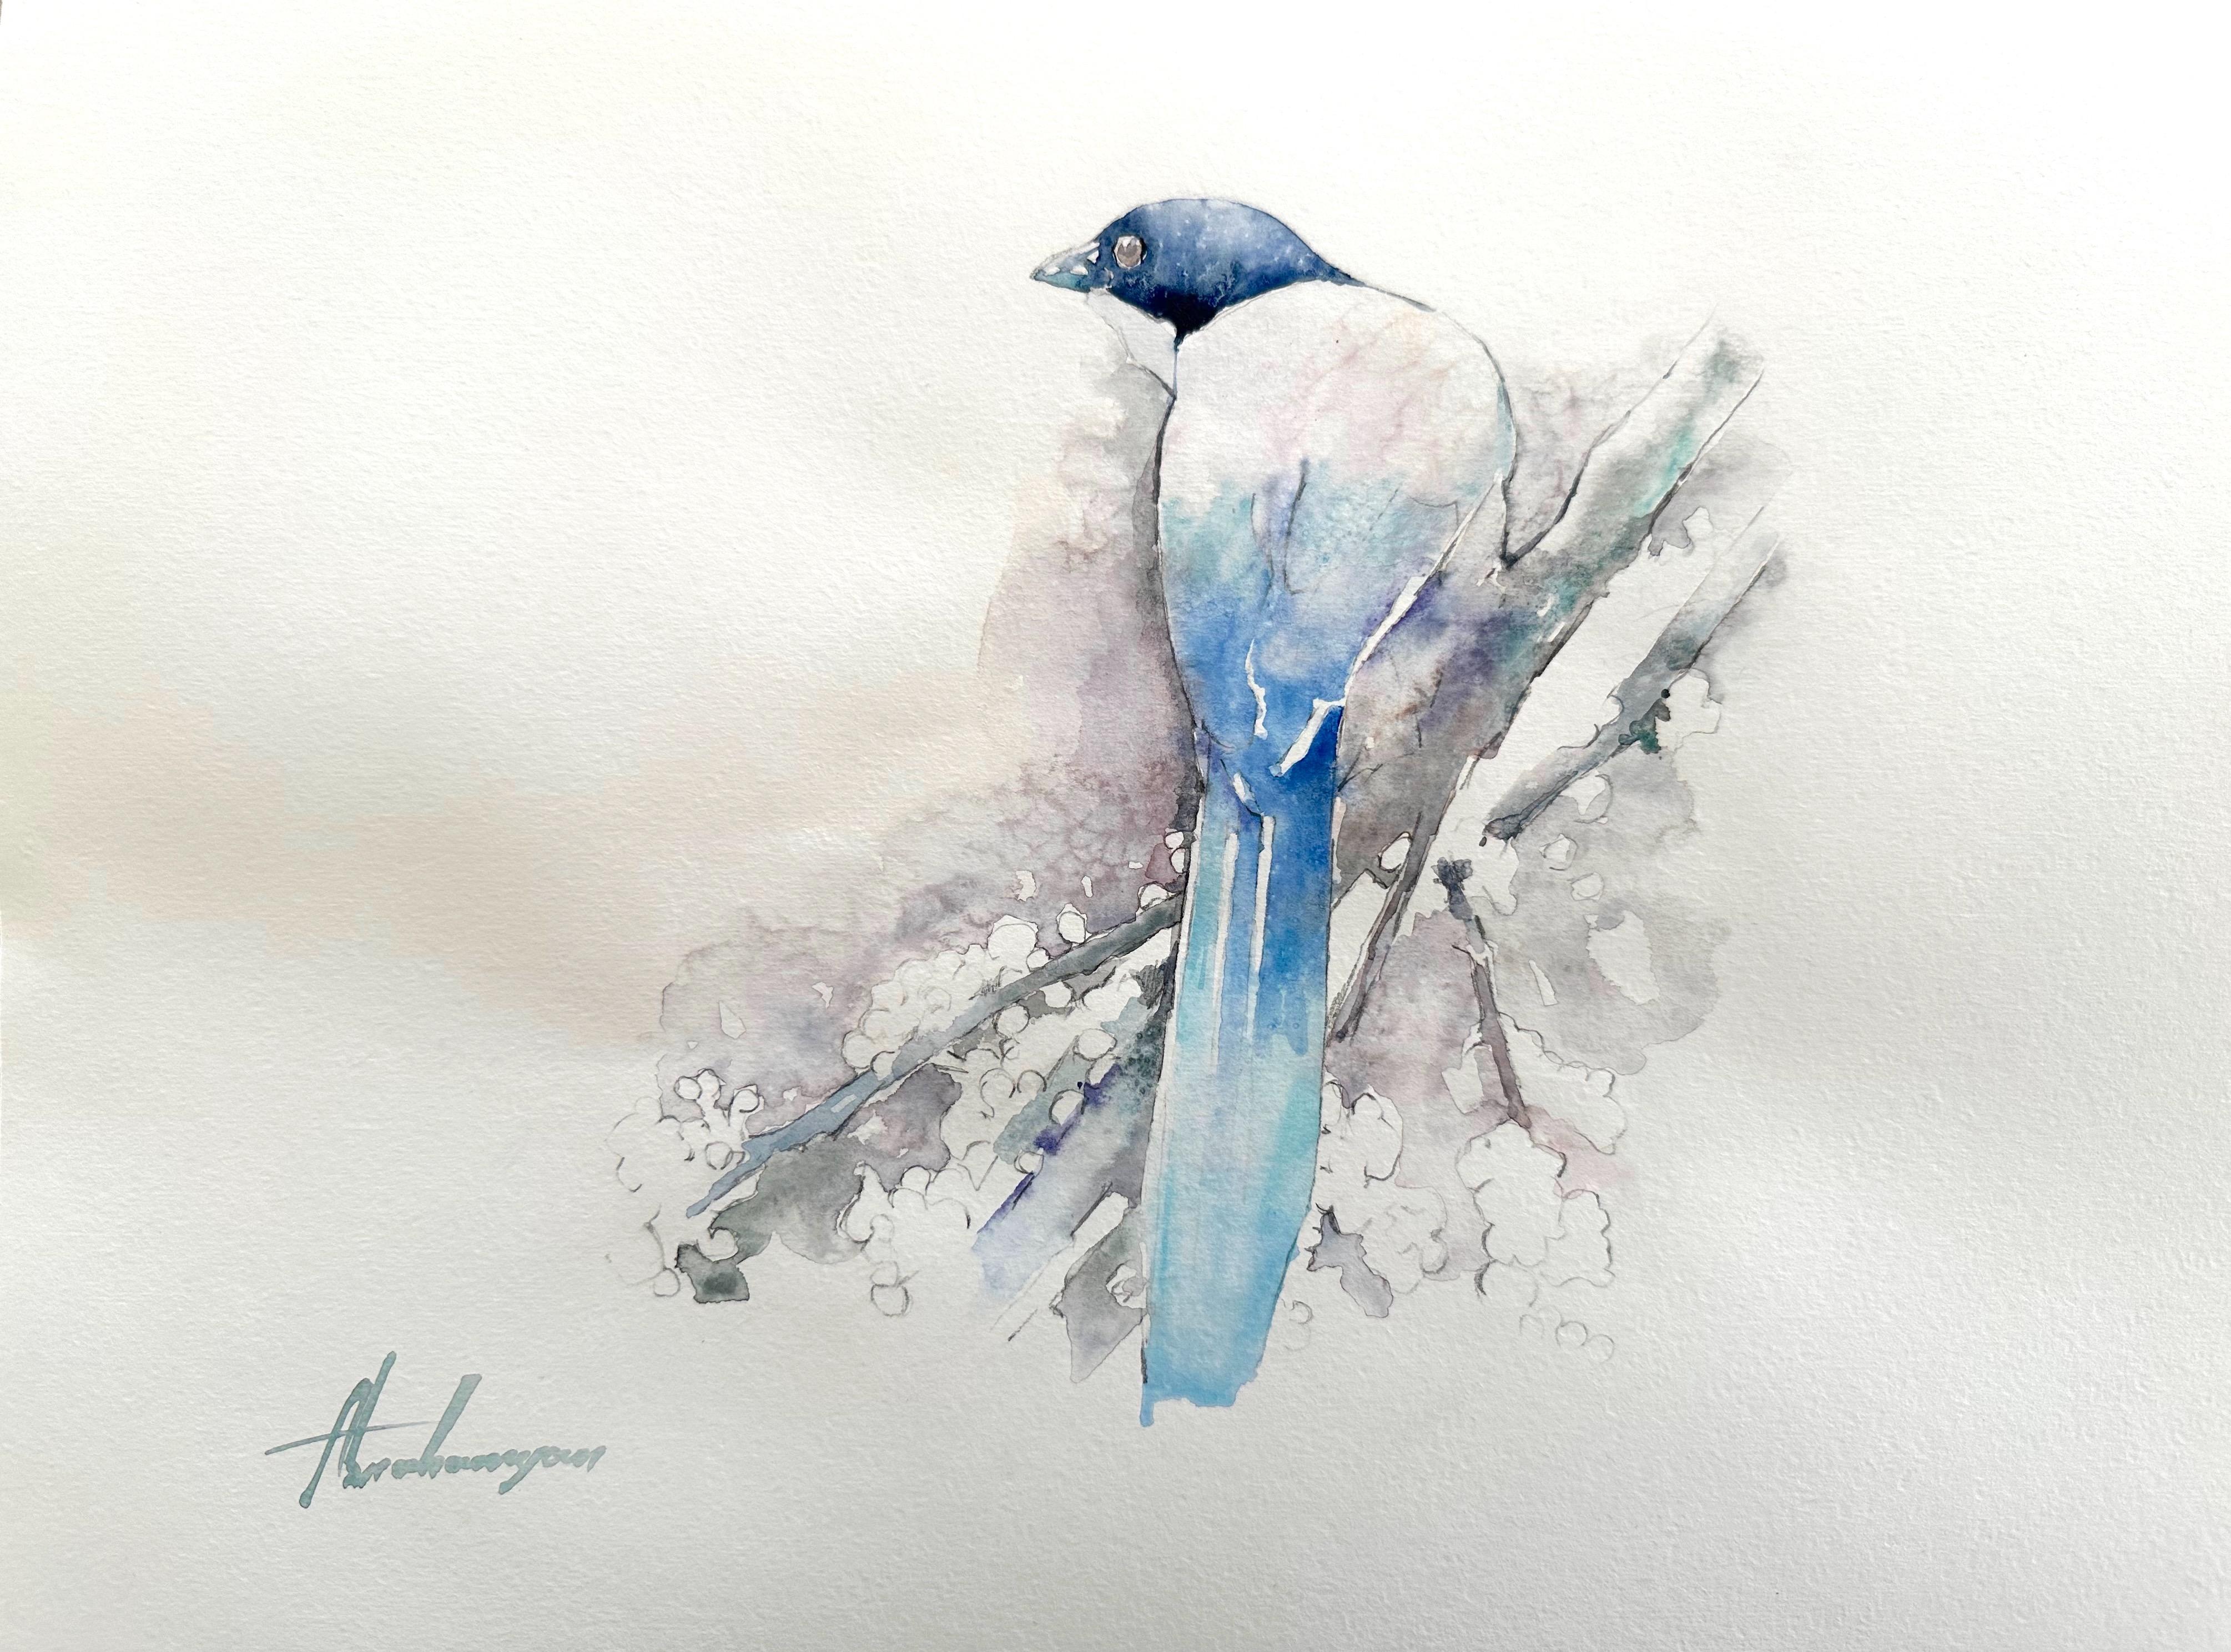 Blue Jay, Bird, Watercolor Handmade Painting, One of a Kind